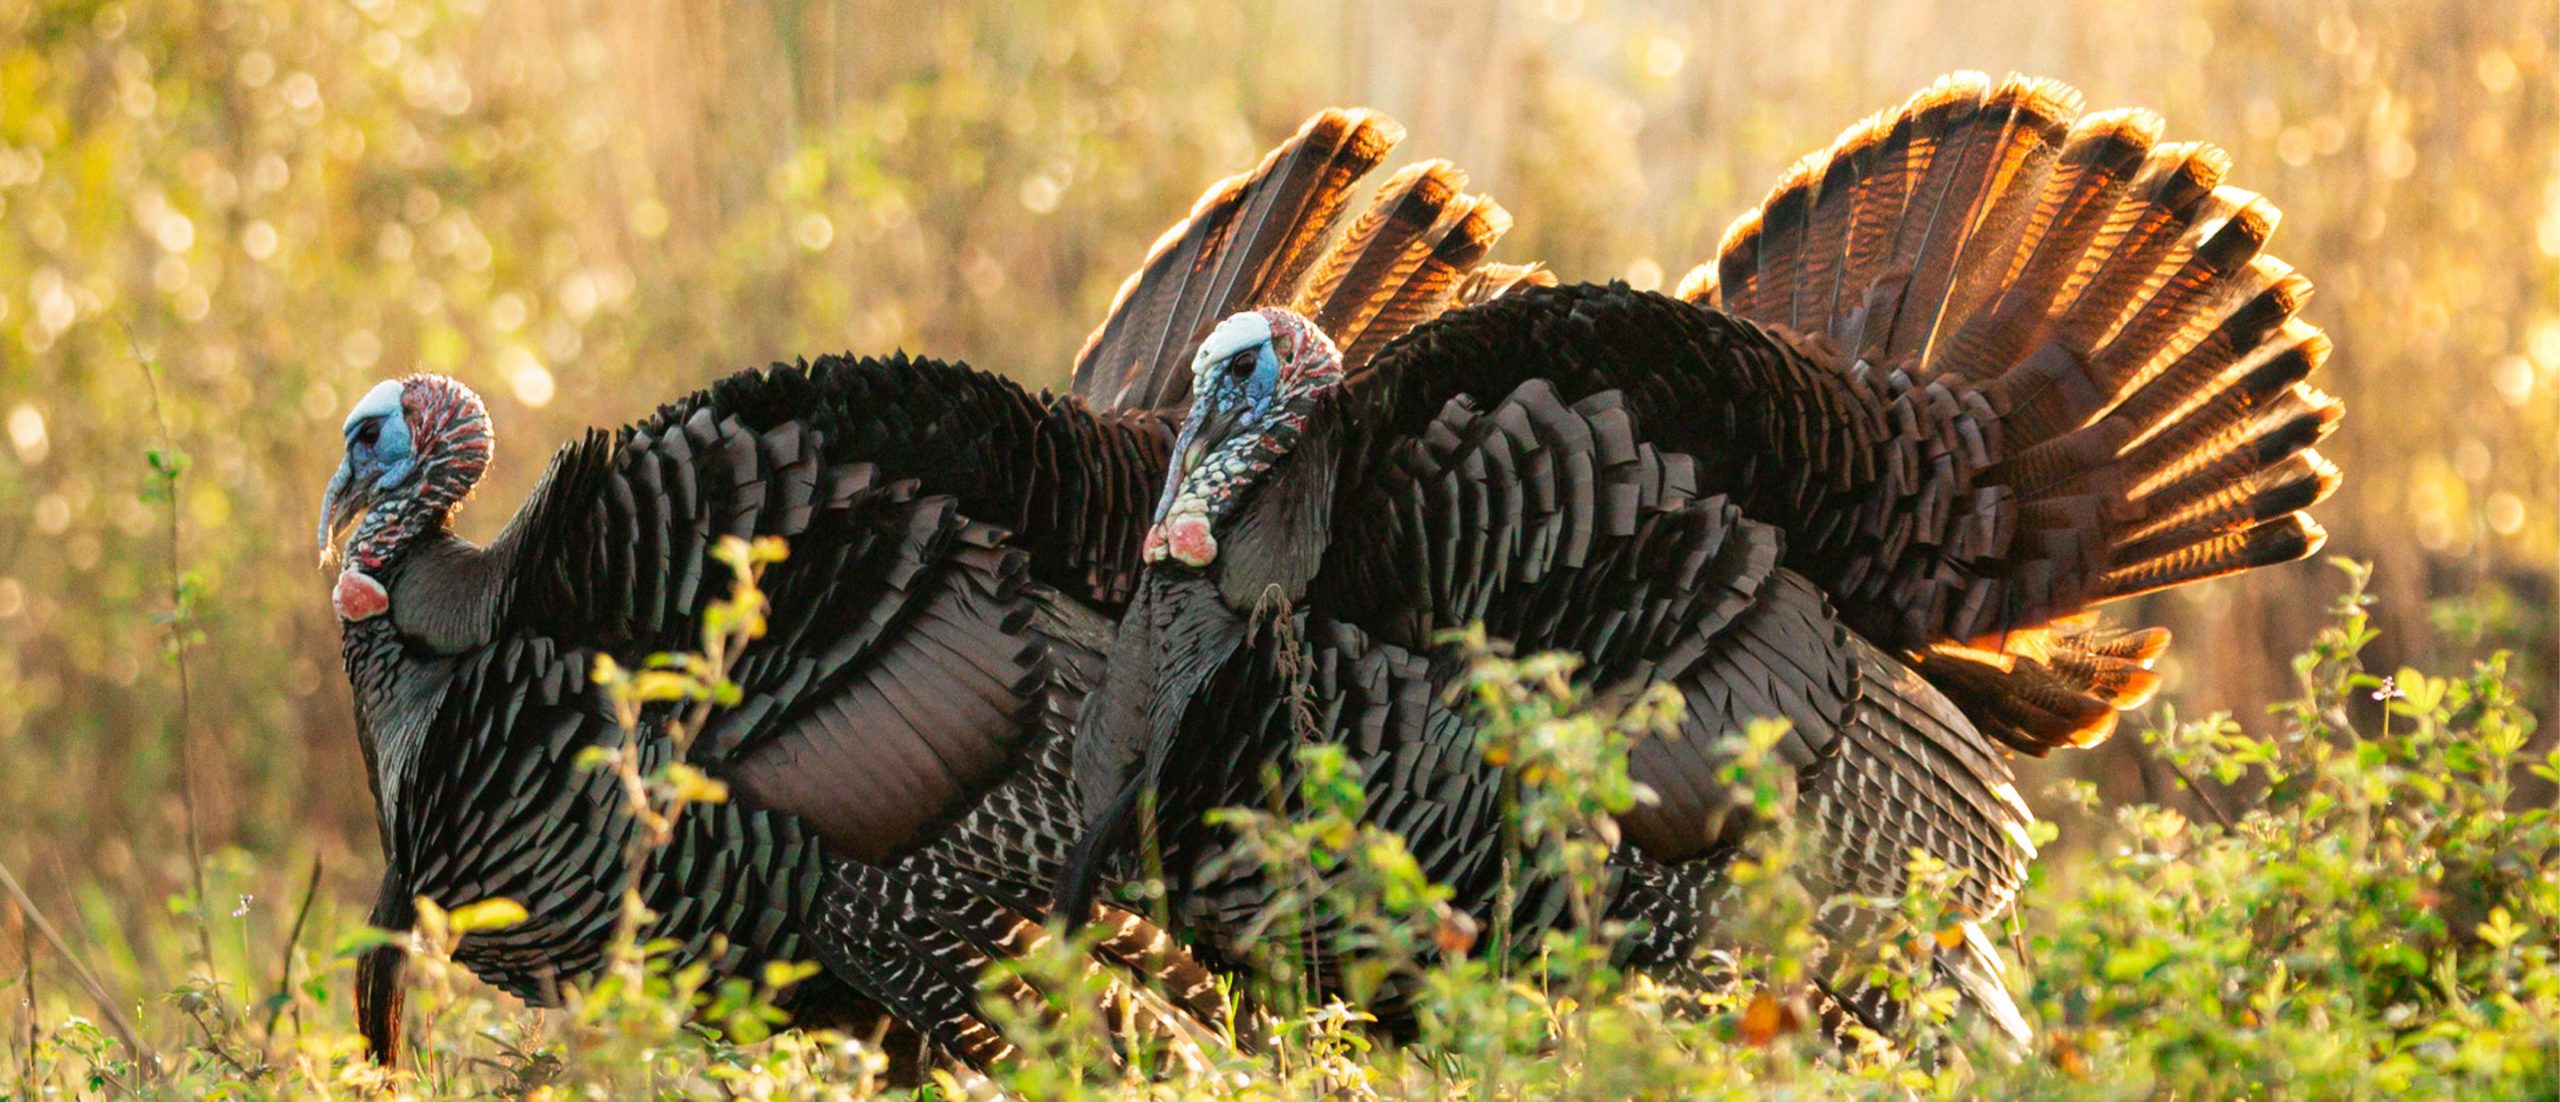 The NWTF South Carolina State Chapter Allocates 197,415 to Healthy